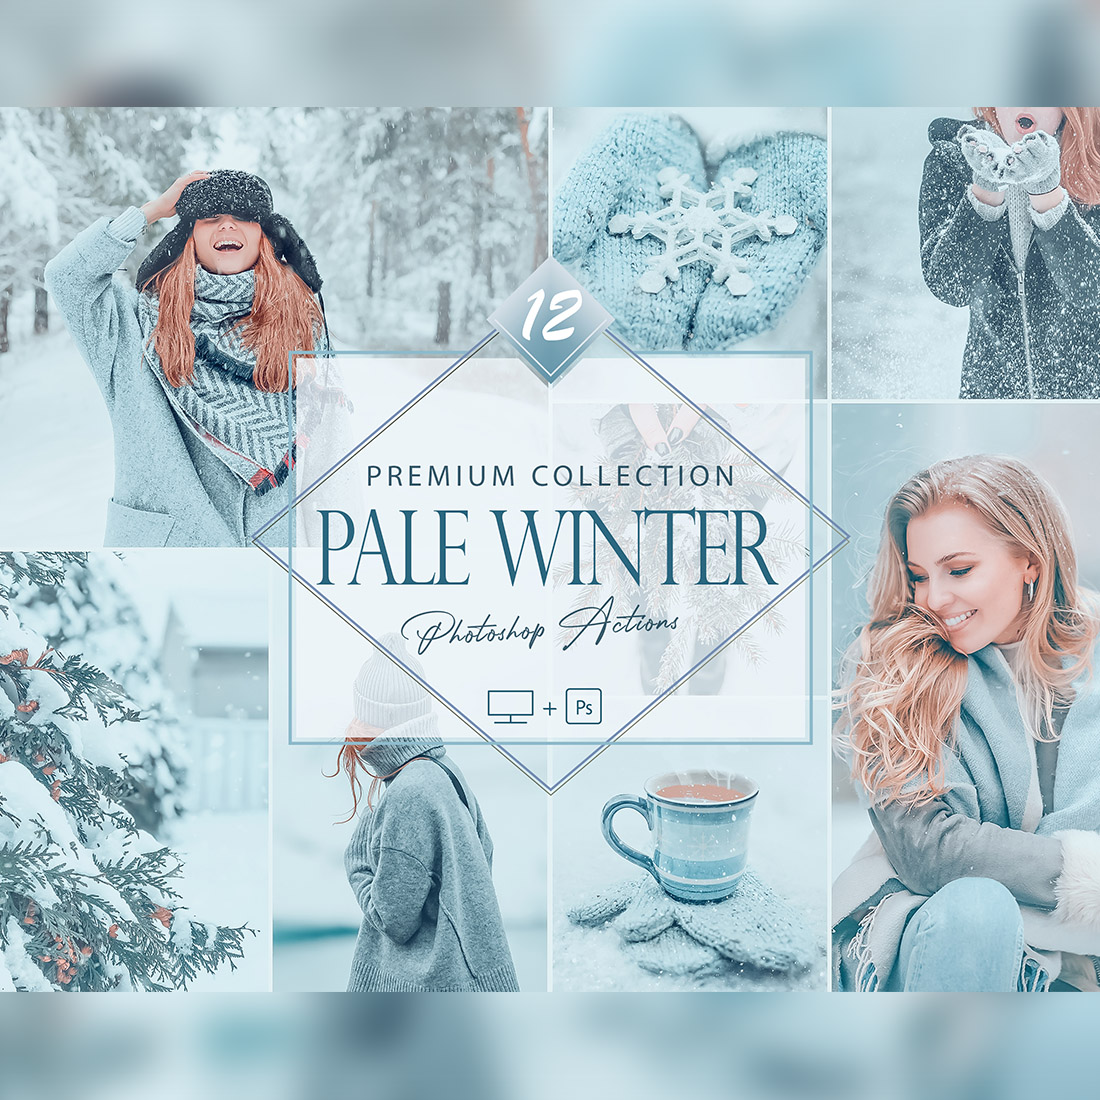 12 Pale Winter Photoshop Actions, Pastel ACR Preset, Blue Ps Filter, Portrait And Lifestyle Theme For Instagram, Blogger, Outdoor cover image.